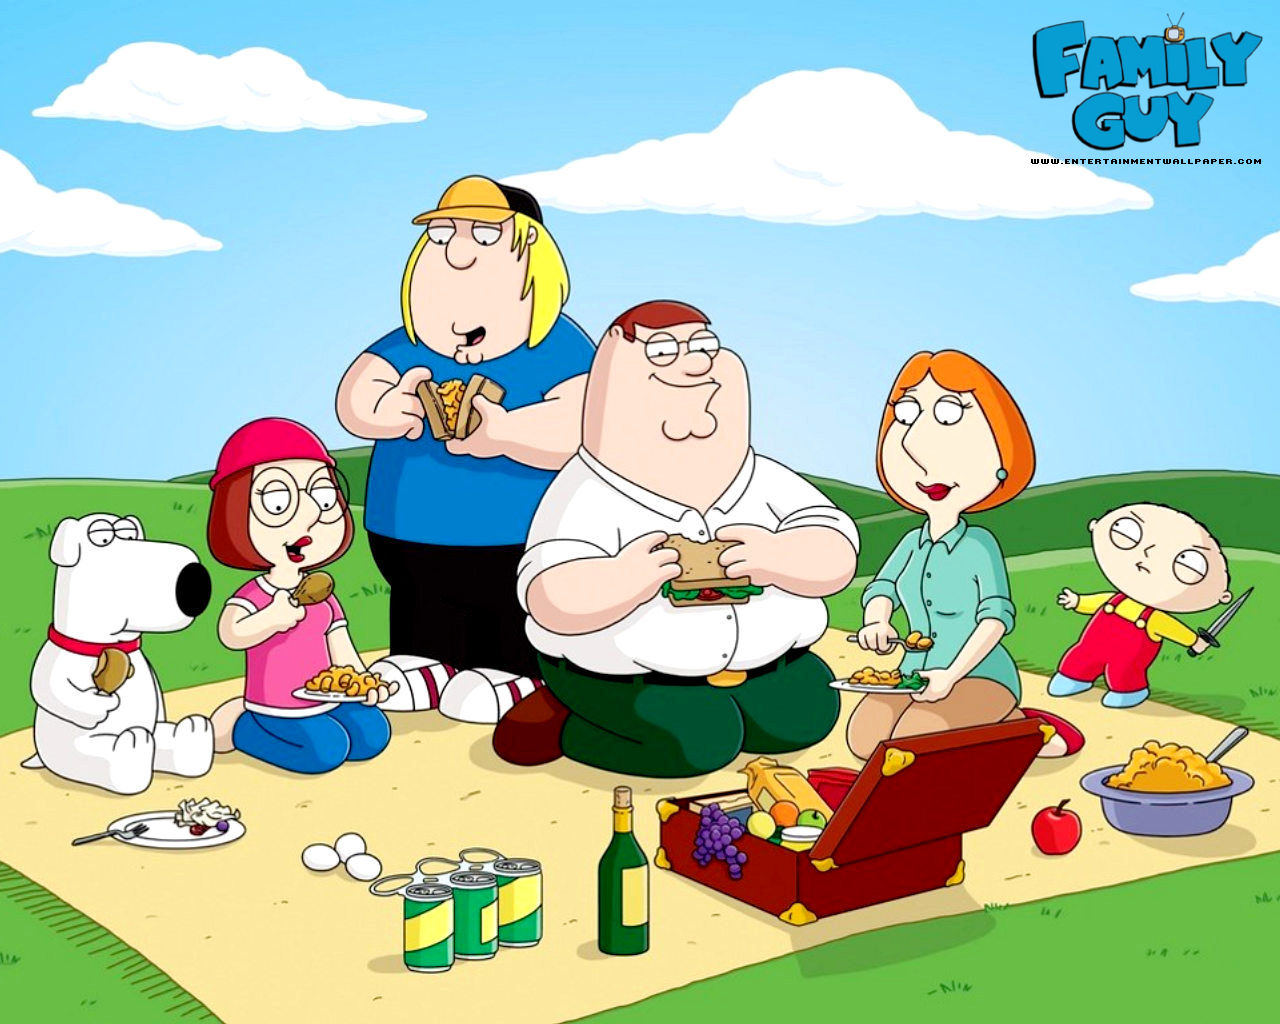 Family Guy Wallpapers For Computer Wallpaper - Family Guy Picnic - HD Wallpaper 